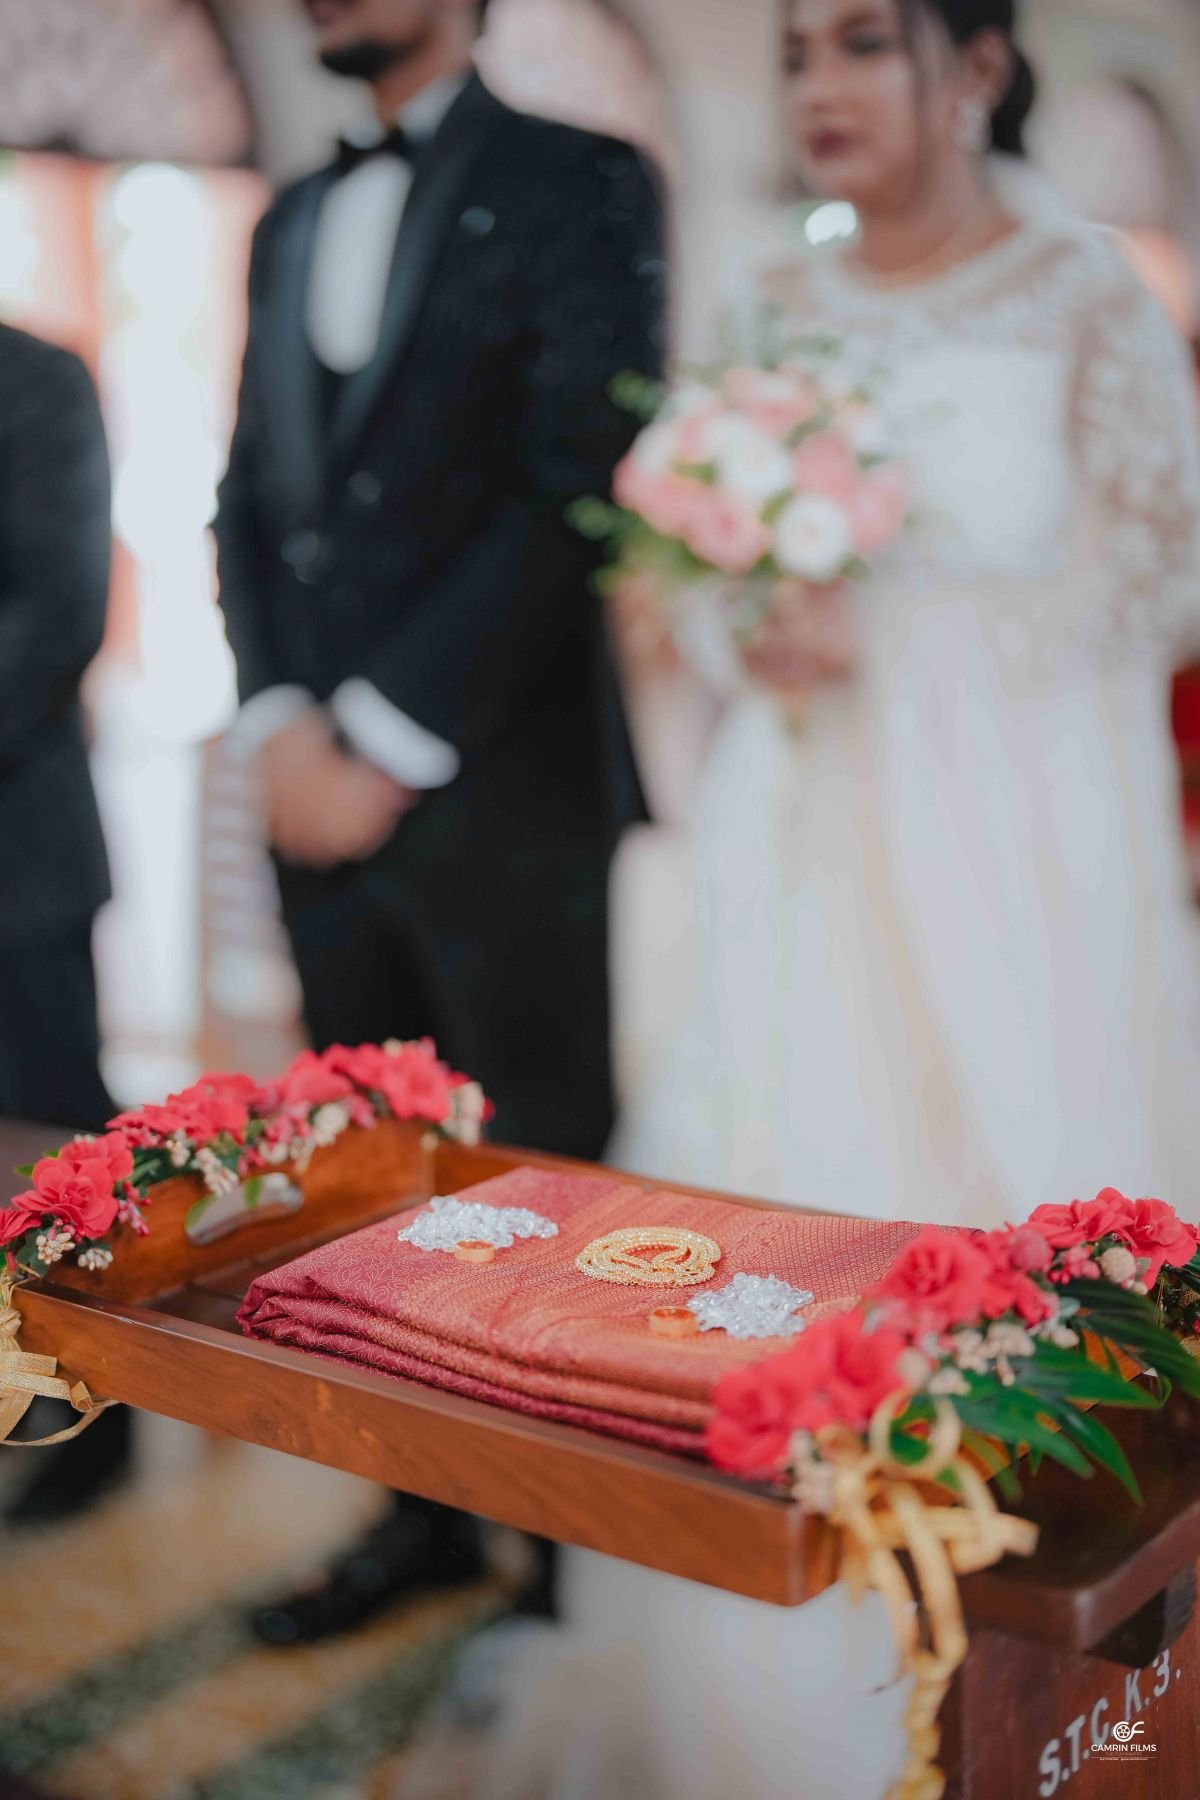 Create Unforgettable Memories With A Classic Christian Wedding.